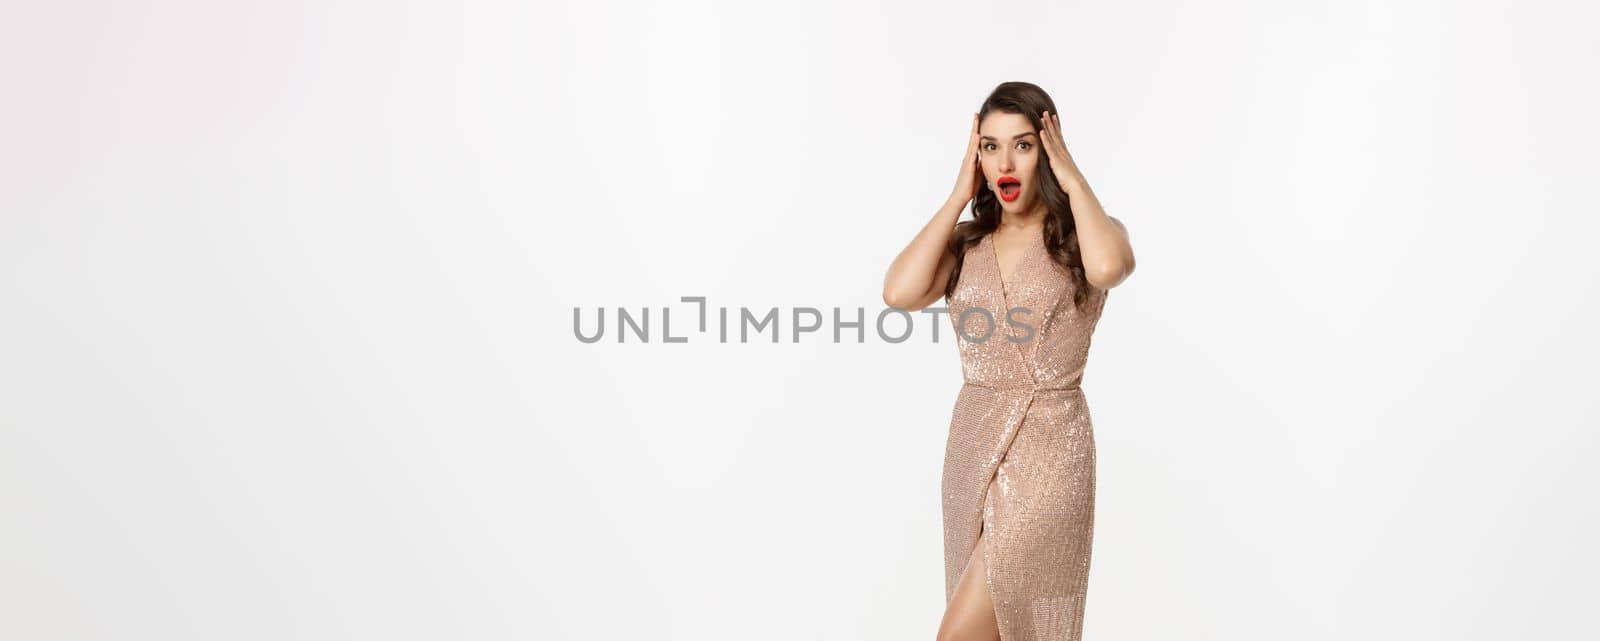 Christmas party and celebration concept. Full length of beautiful brunette woman looking surprised, wearing elegant dressed and staring with disbelief at camera, white background.